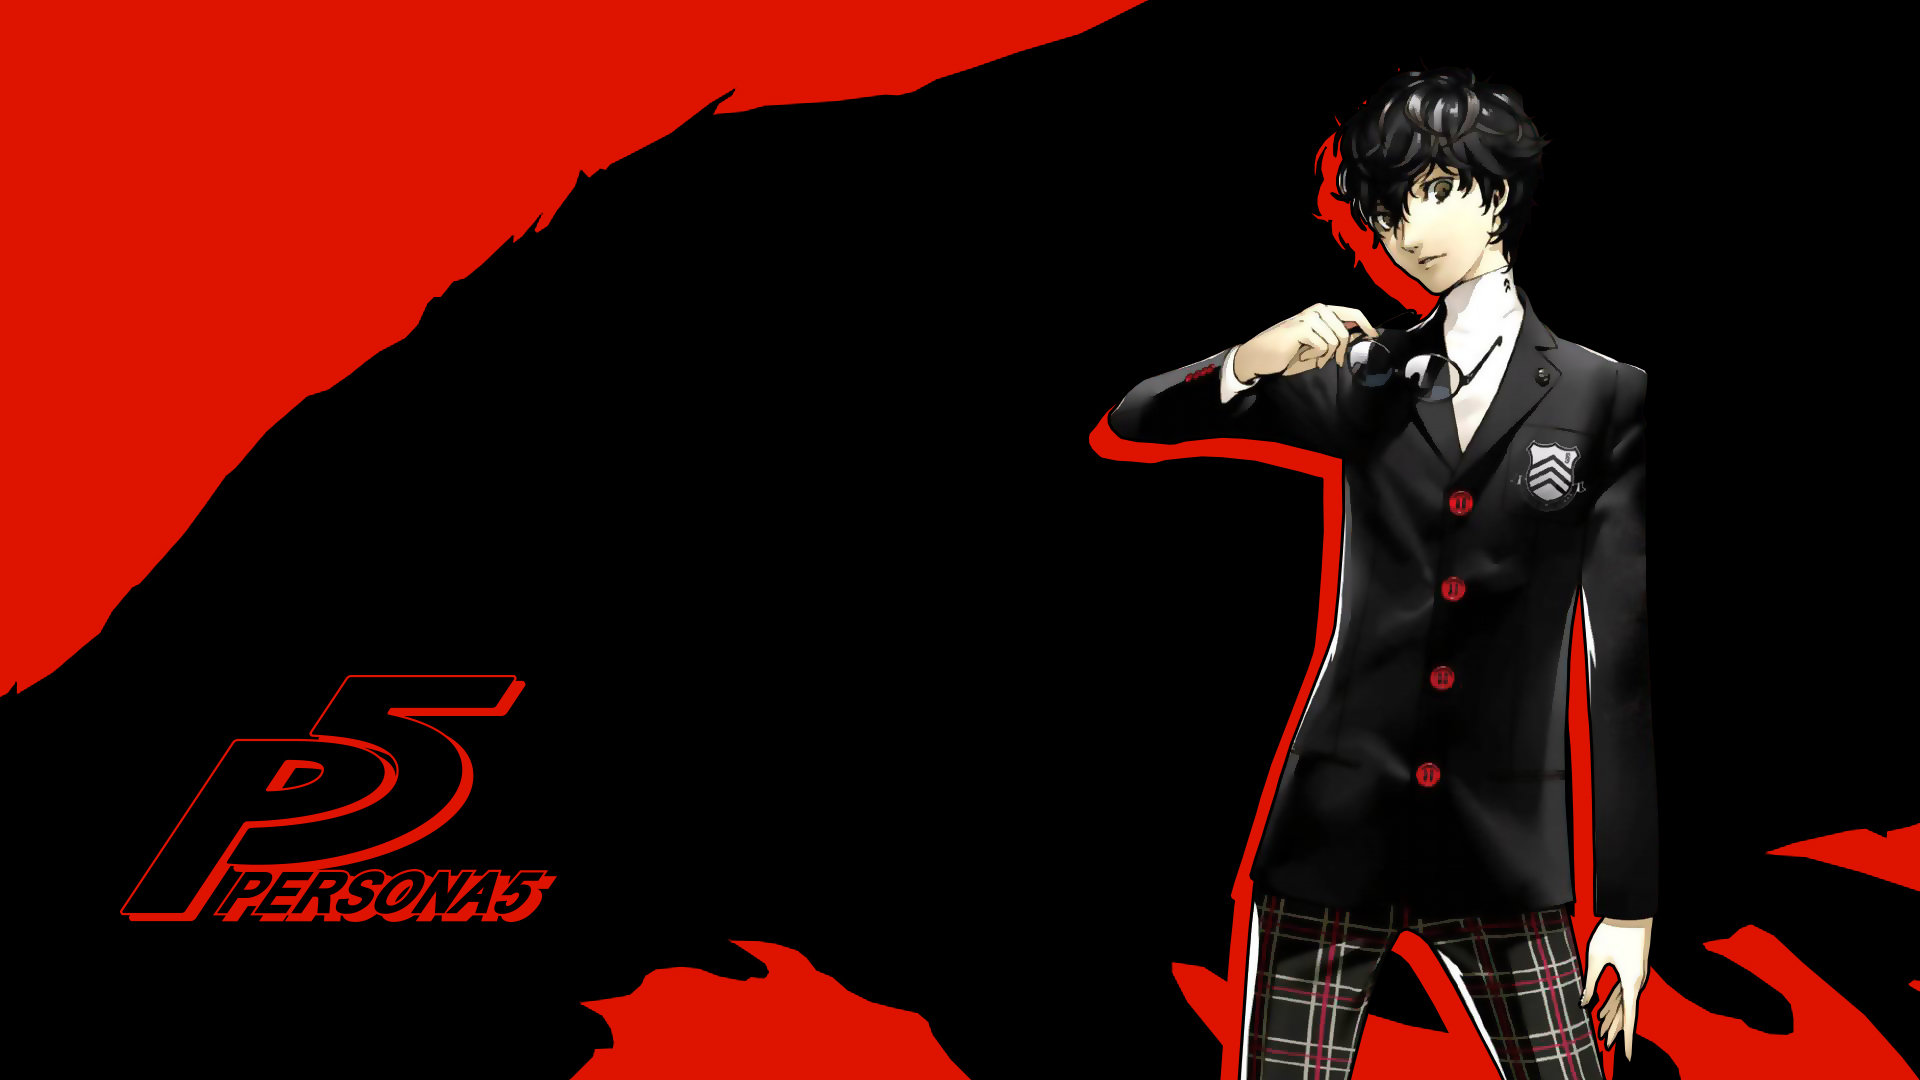 Awesome Persona 5 free wallpaper ID:110865 for hd 1920x1080 computer